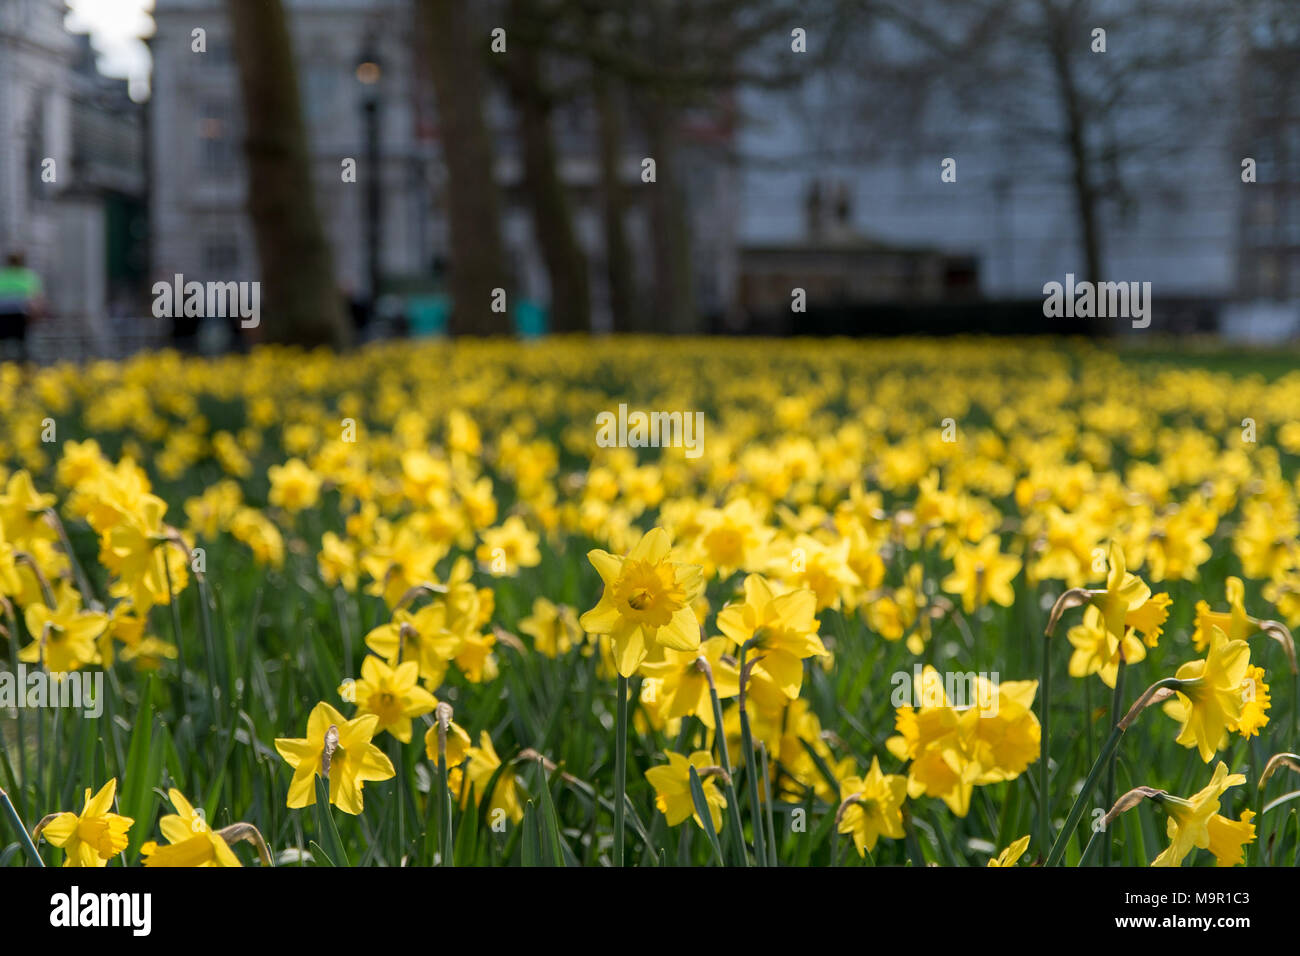 Yellow Daffodils flowers in St James Park London during Spring Stock Photo